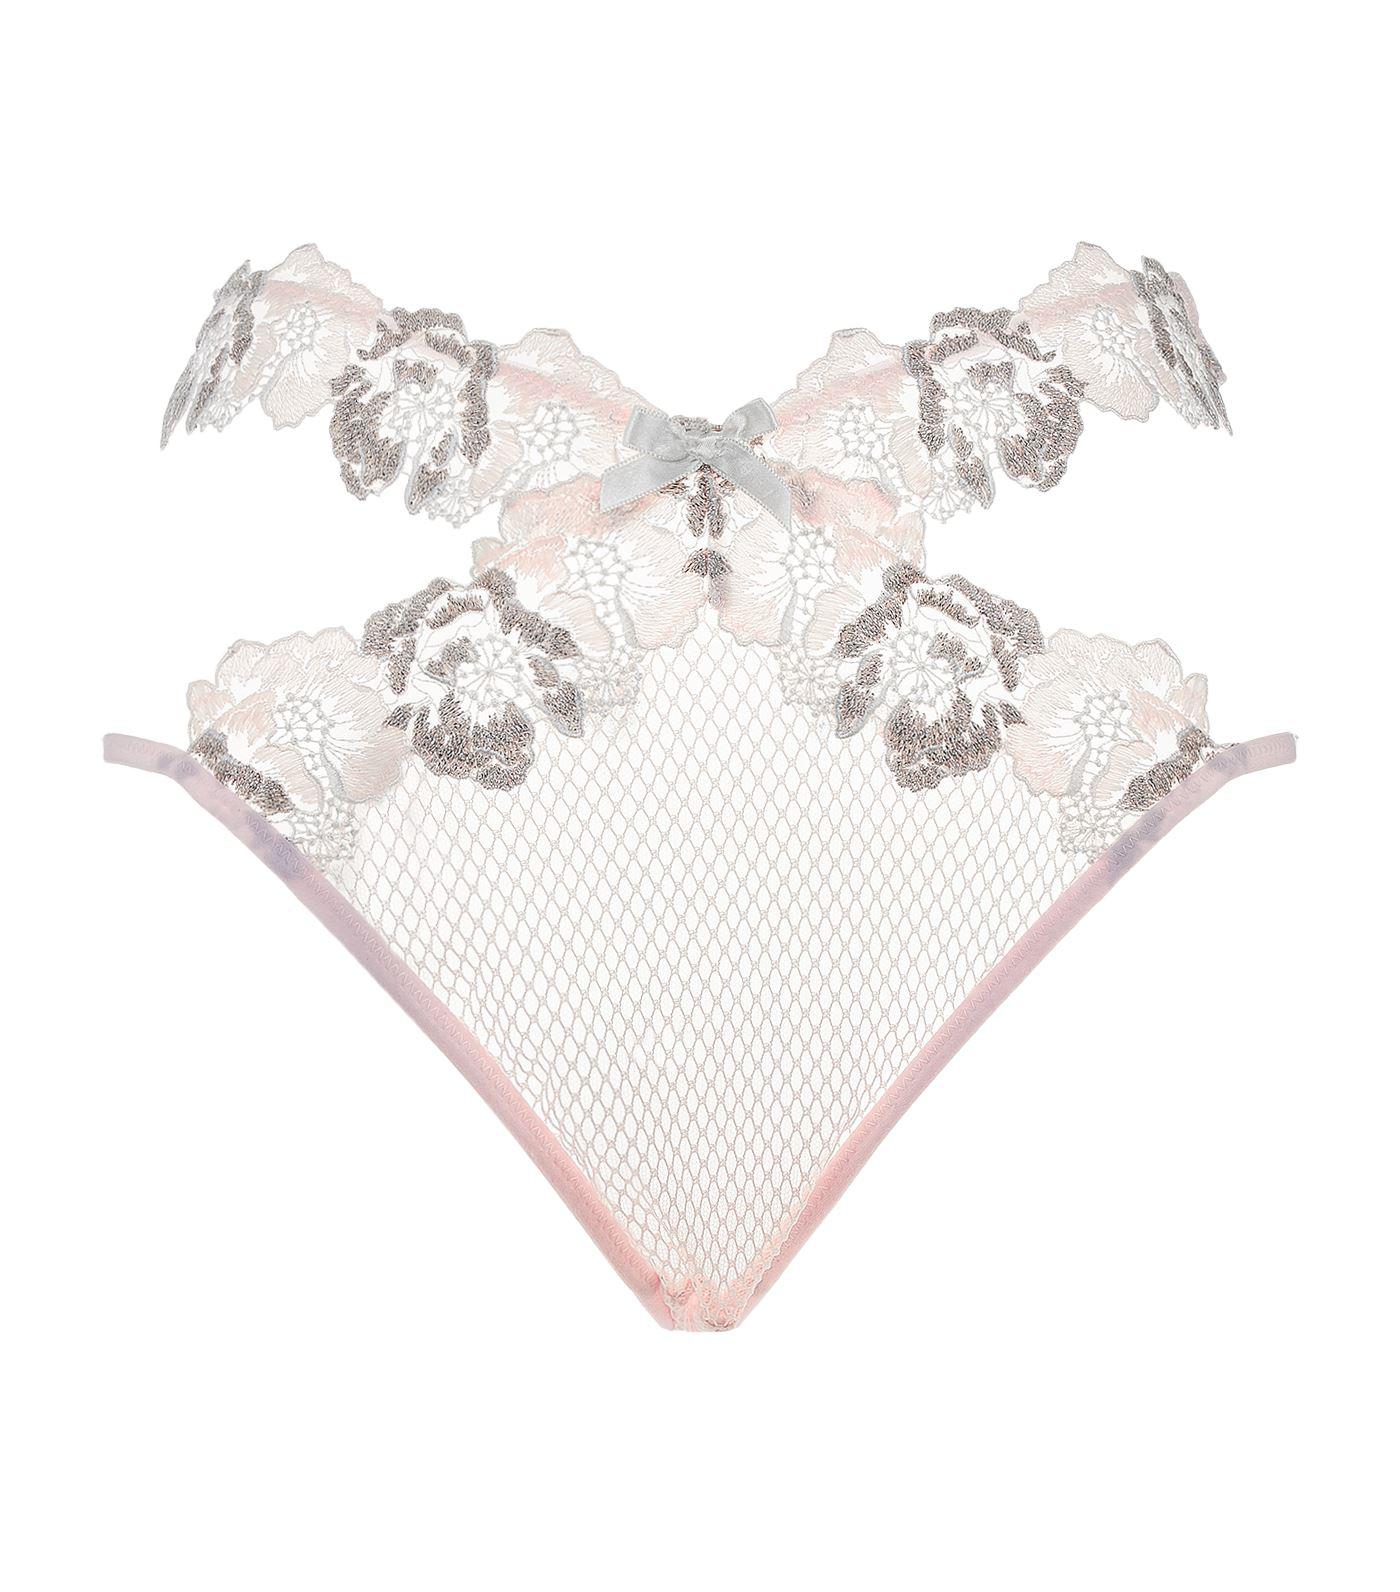 Agent Provocateur Lace Eliza Cut-out Briefs in Pink - Lyst